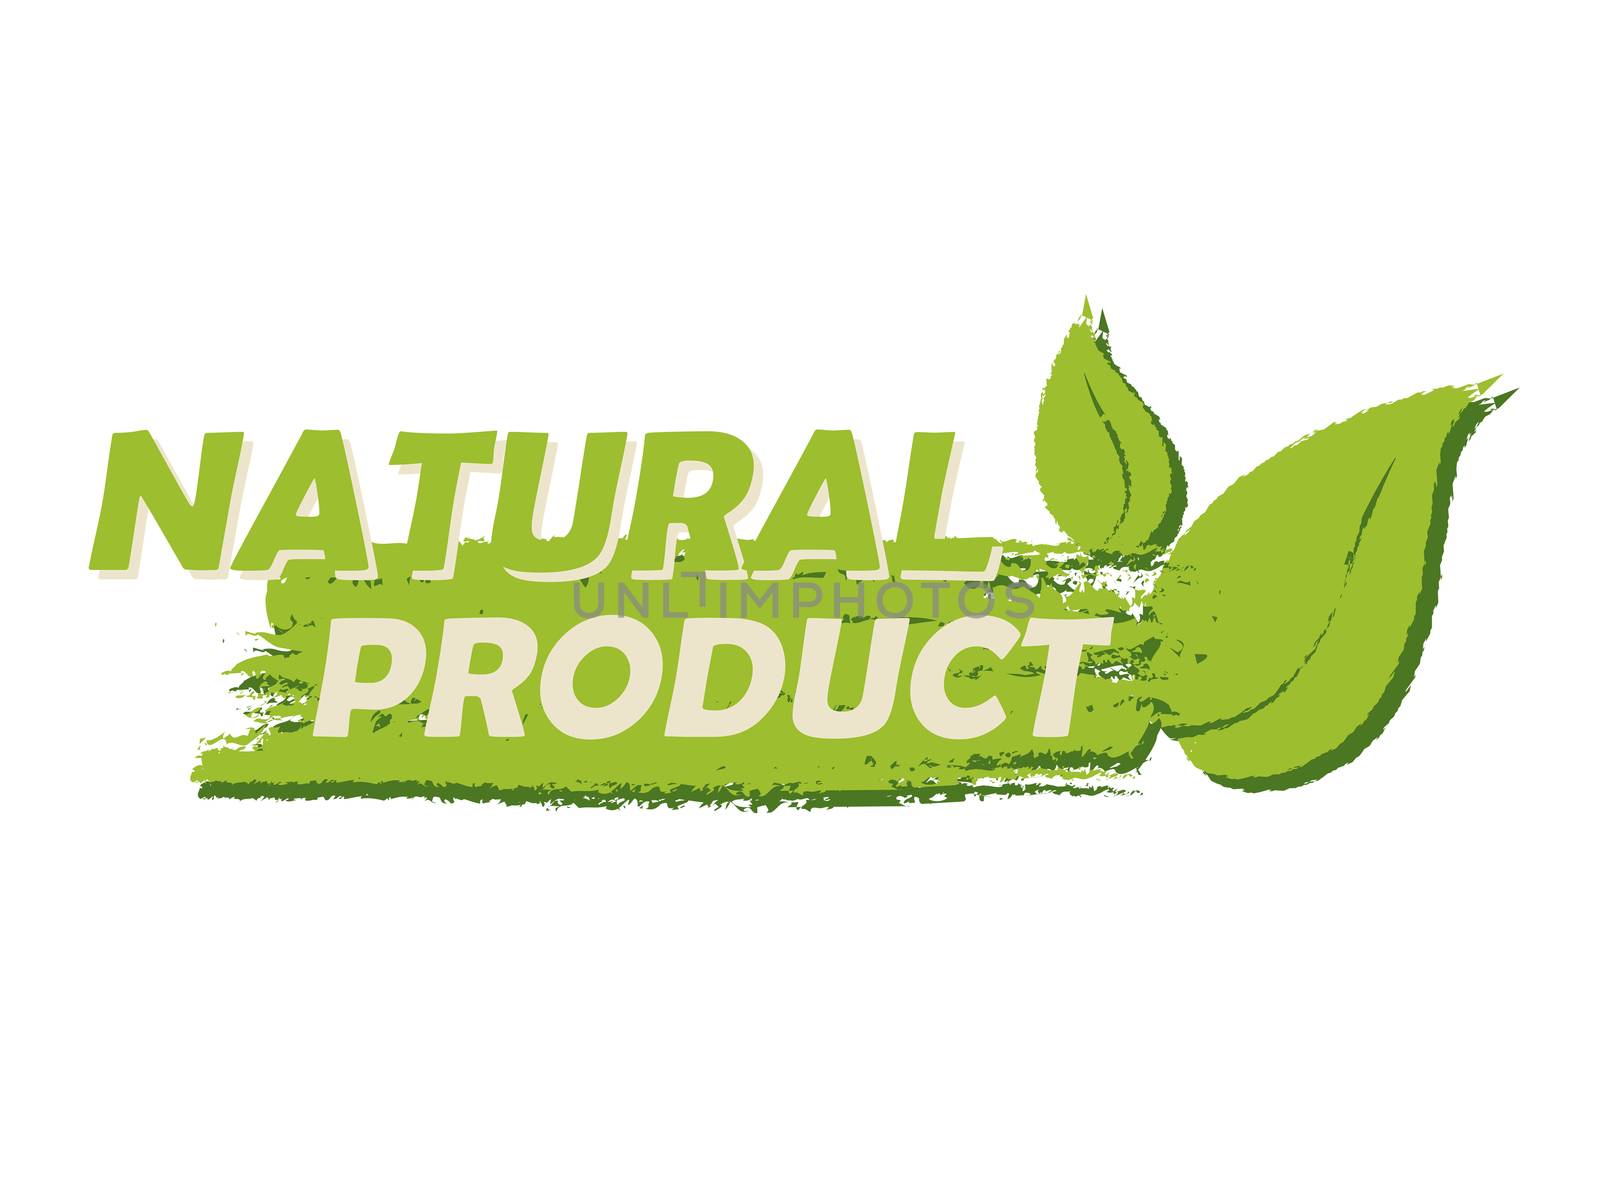 natural product with leaf sign, green drawn label by marinini